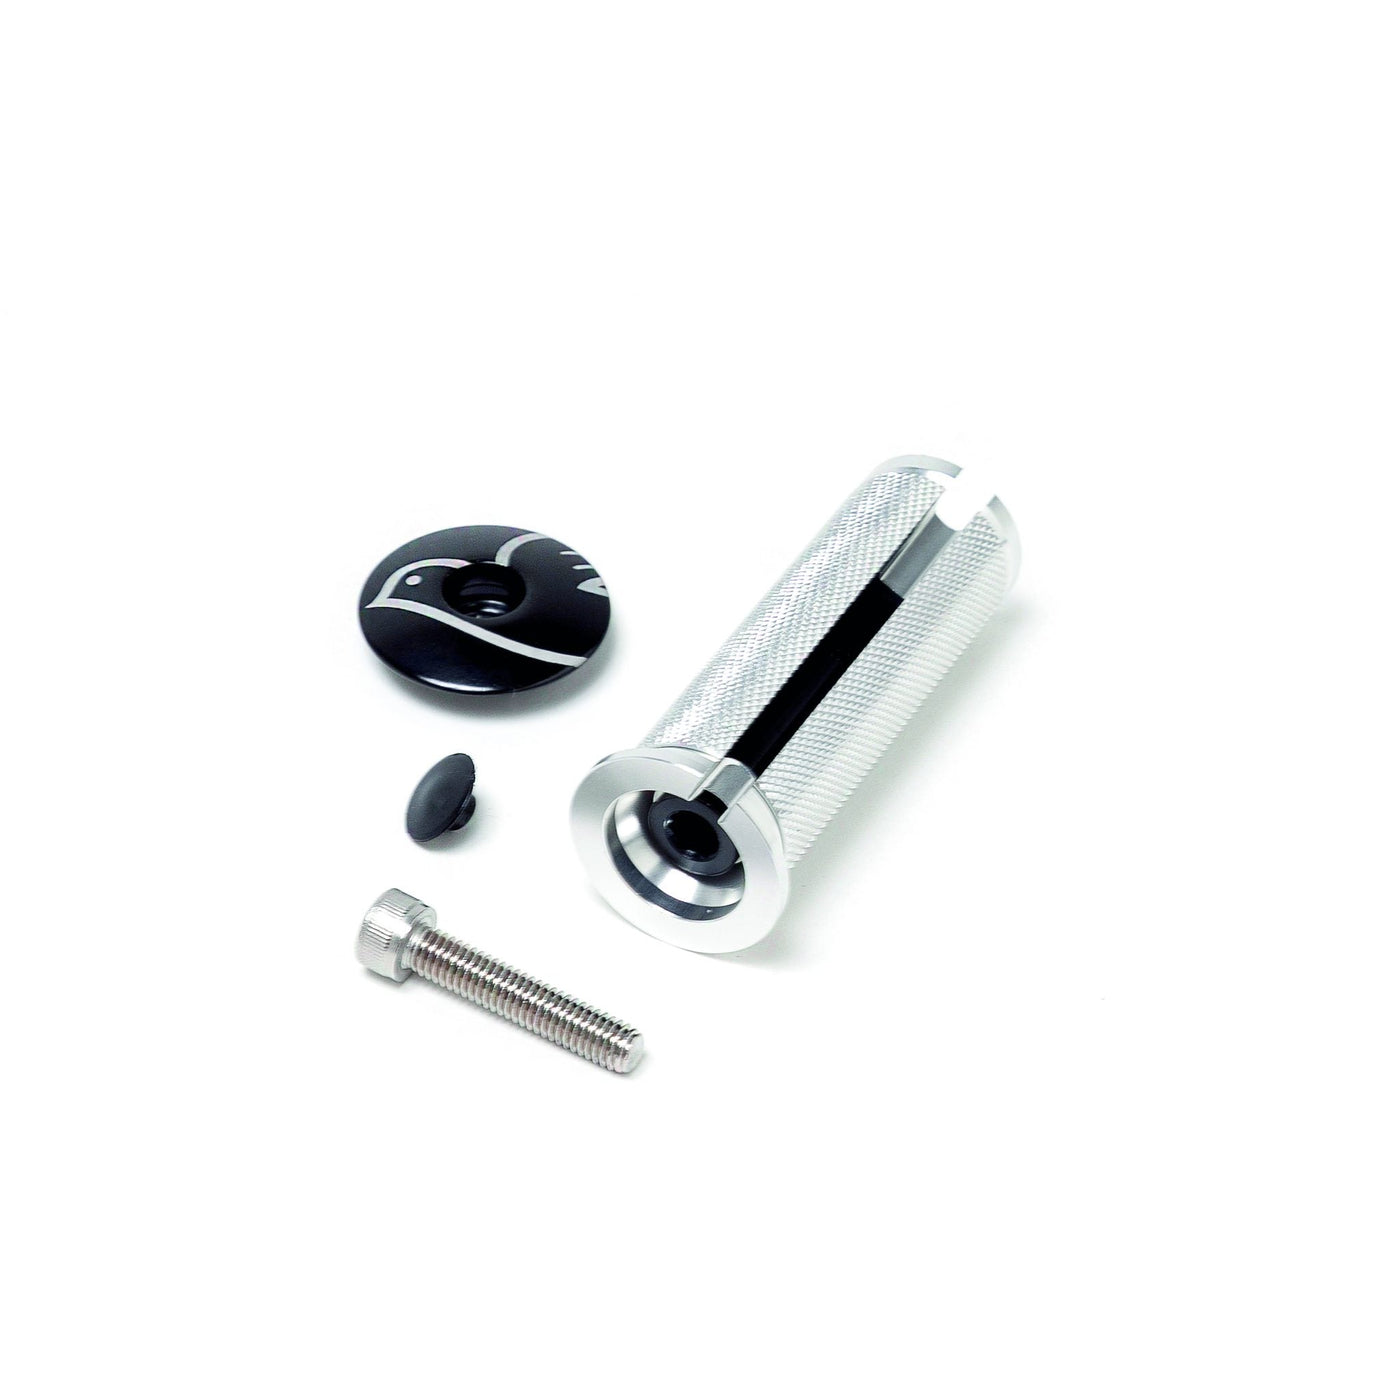 COLUMBUS EXPANDER for 1-1/8" Carbon Steerers (60mm Length + Internal Routing), Expander, IMG.1